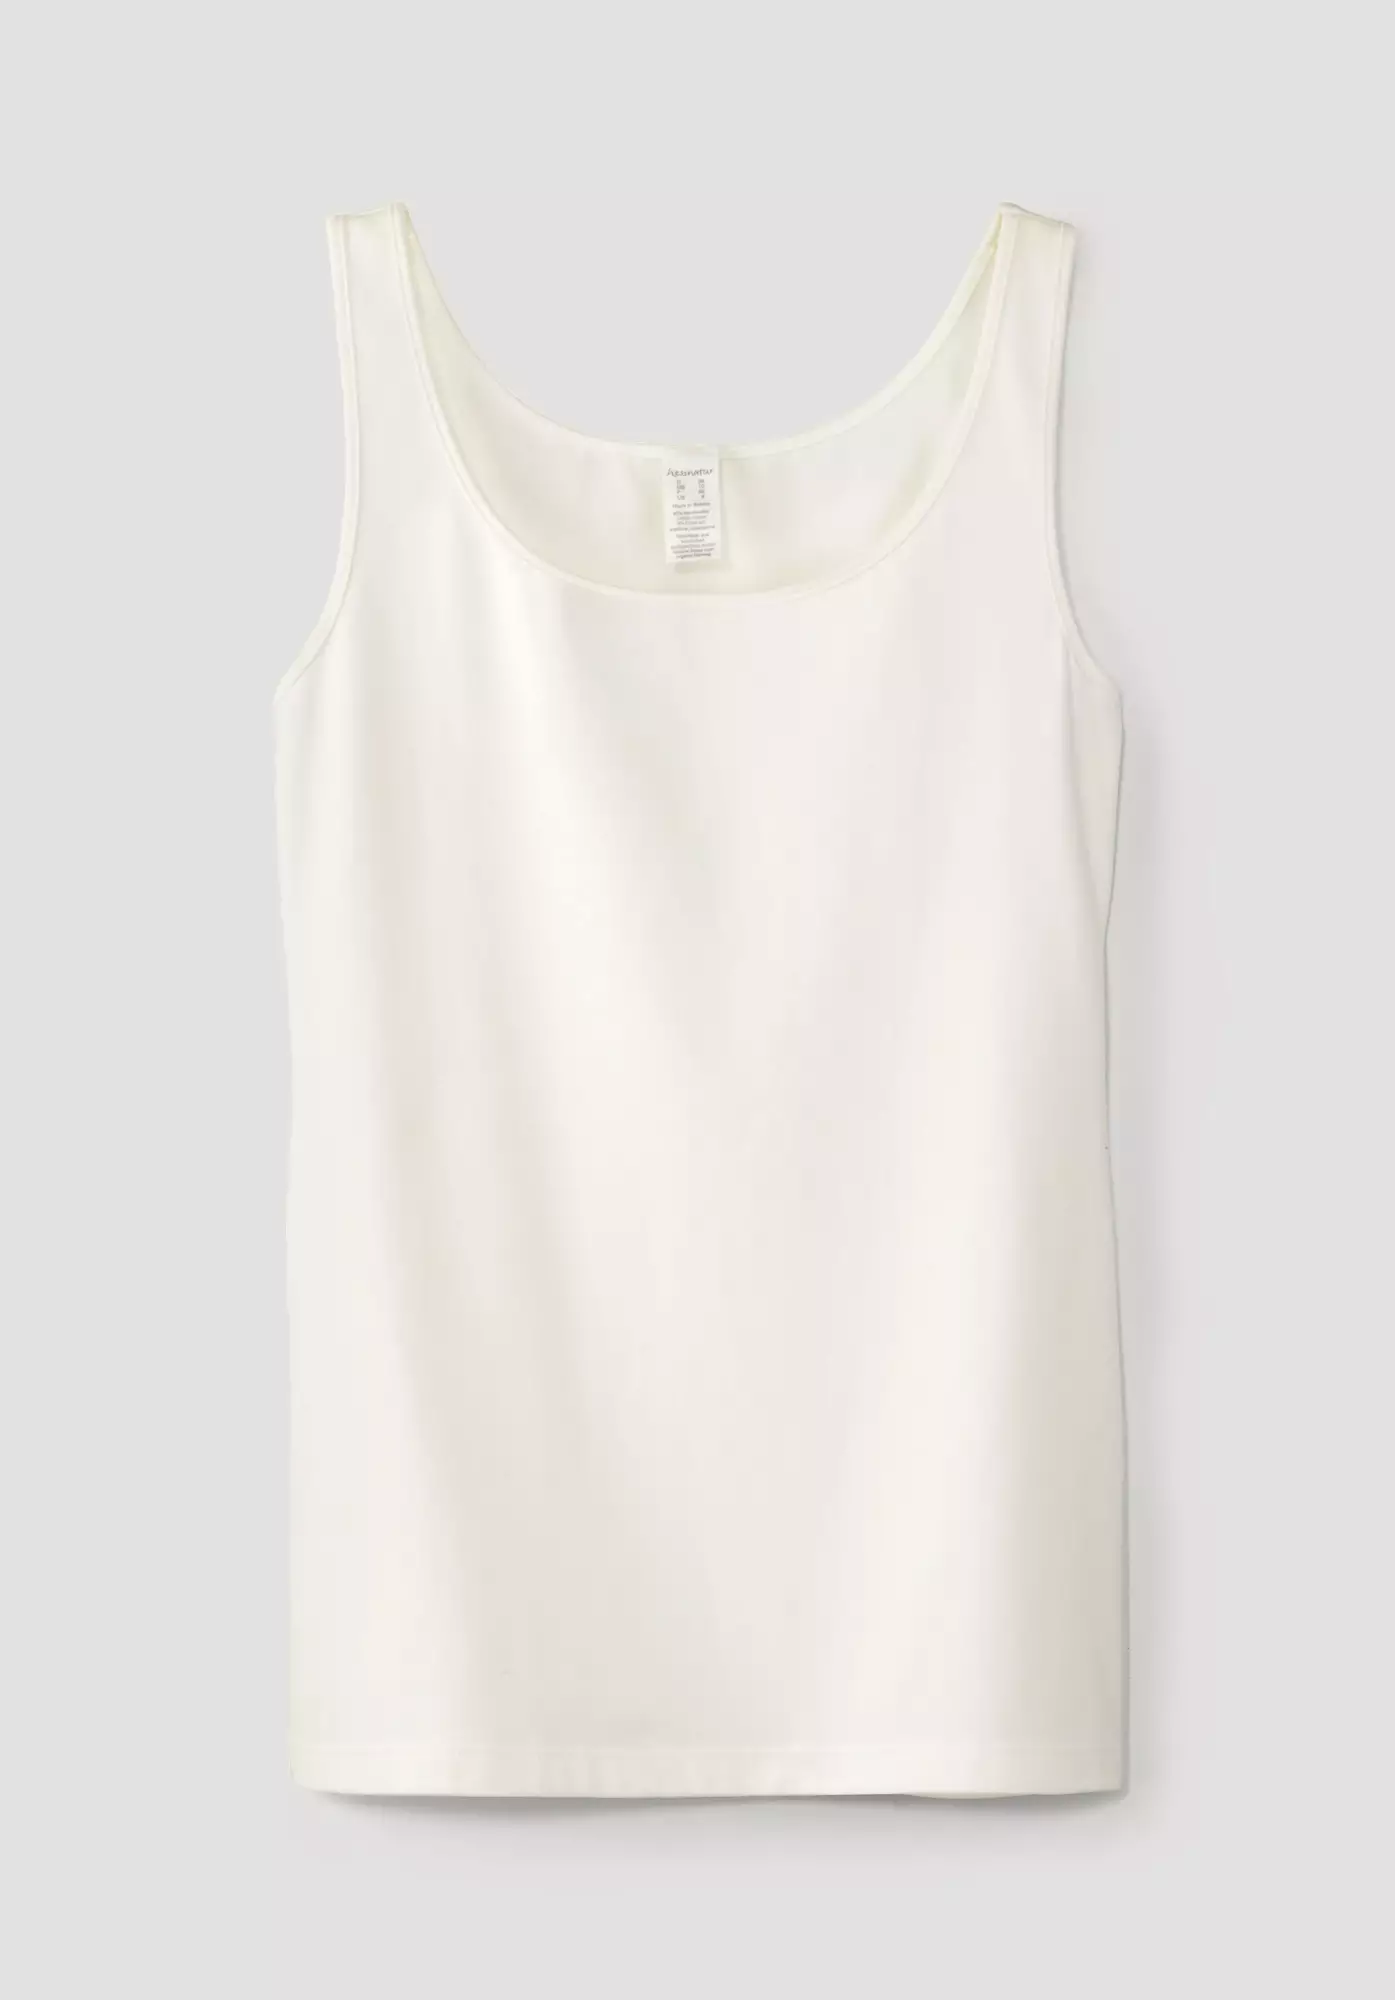 Tank top PureLUX made from organic cotton - 2